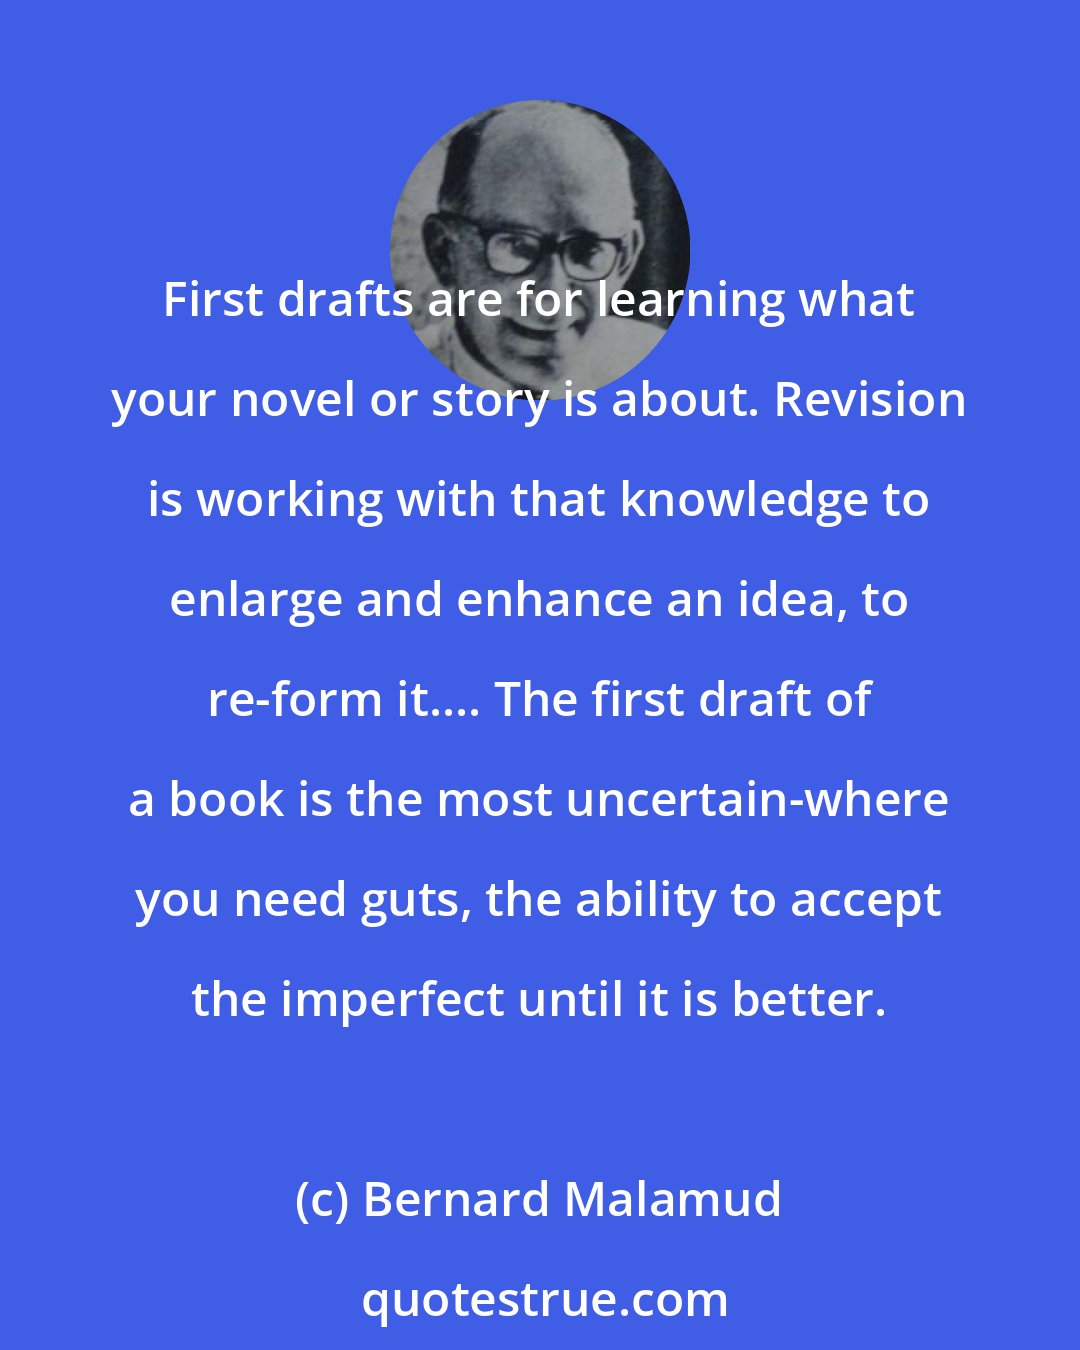 Bernard Malamud: First drafts are for learning what your novel or story is about. Revision is working with that knowledge to enlarge and enhance an idea, to re-form it.... The first draft of a book is the most uncertain-where you need guts, the ability to accept the imperfect until it is better.